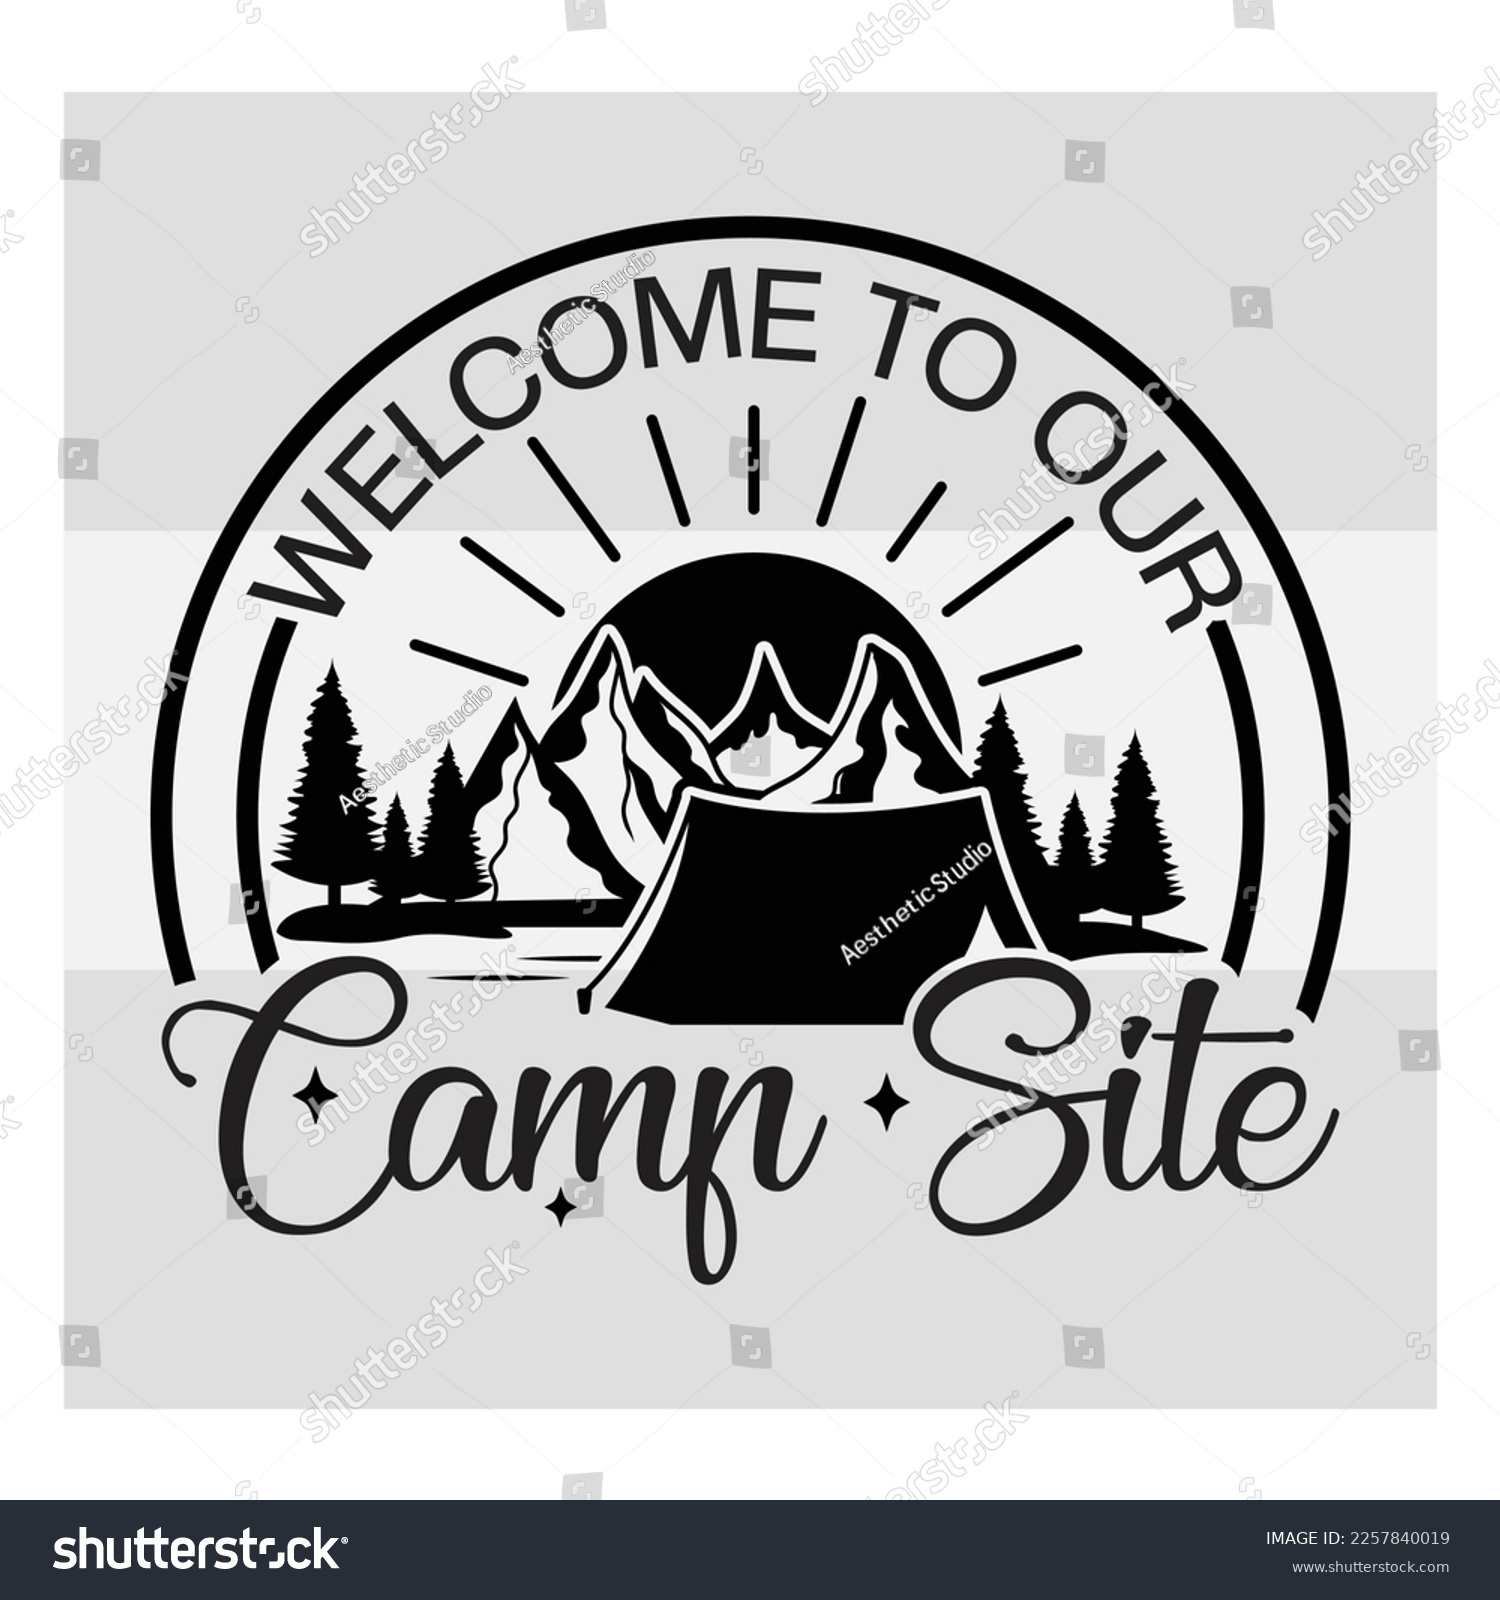 SVG of Welcome To Our Camp Site, Welcome Camping Svg, Camper, Adventure, Camp Life, Camping Svg, Typography, Camping Quotes, Funny Camping, T-shirt Design, SVG, EPS svg